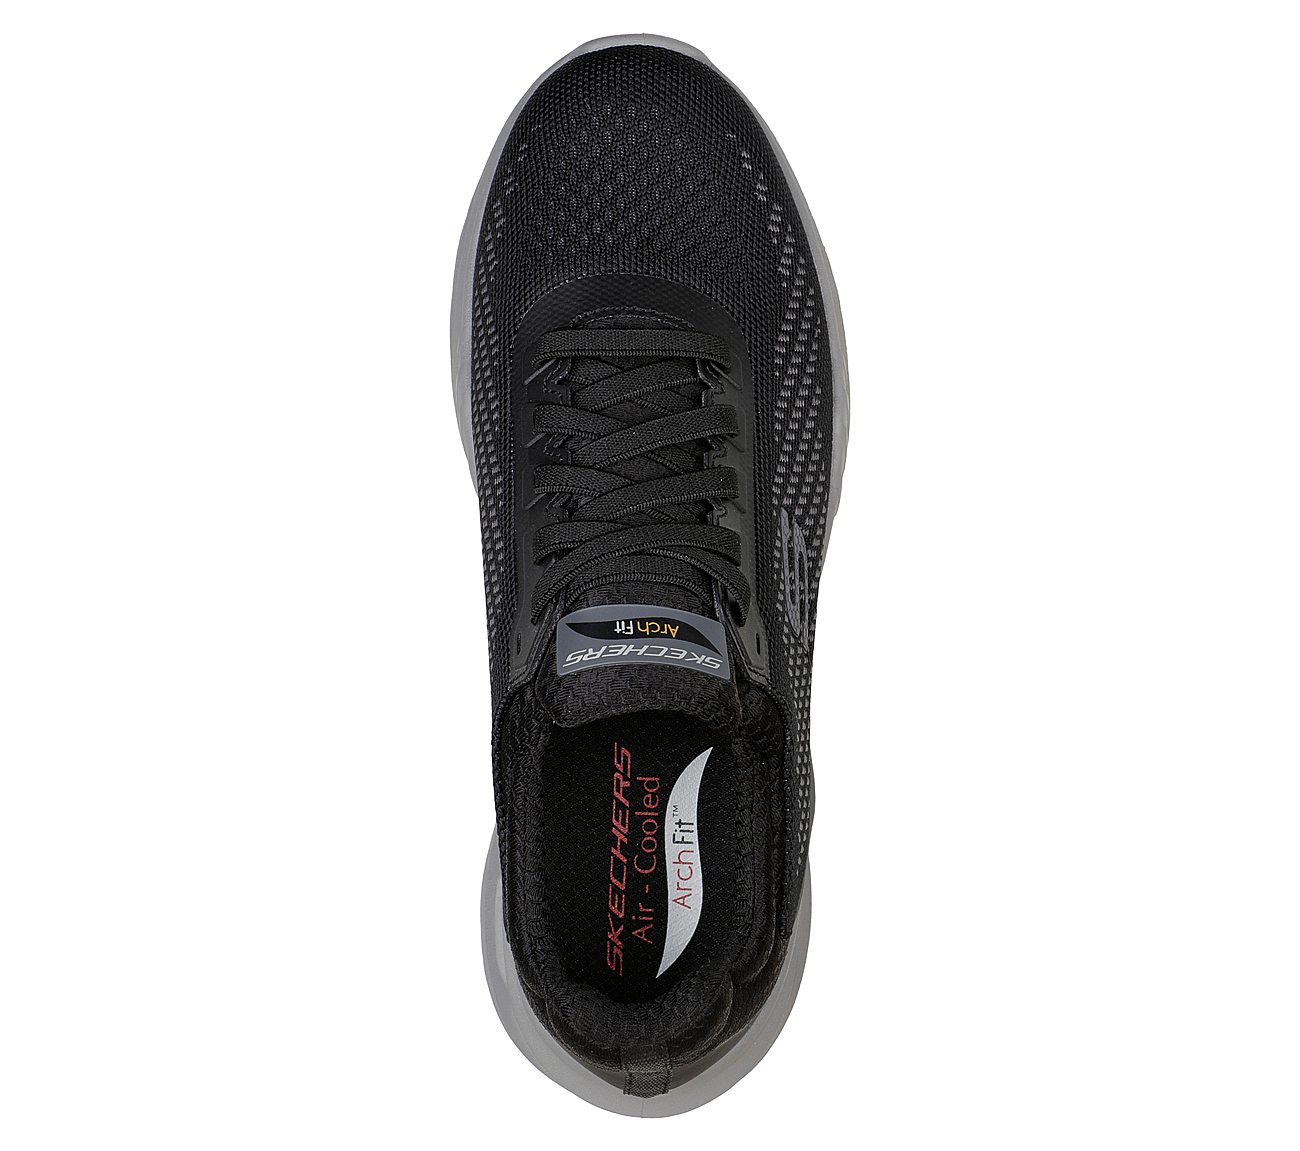 ARCH FIT ORVAN - TRAYVER, BBBBLACK Footwear Top View